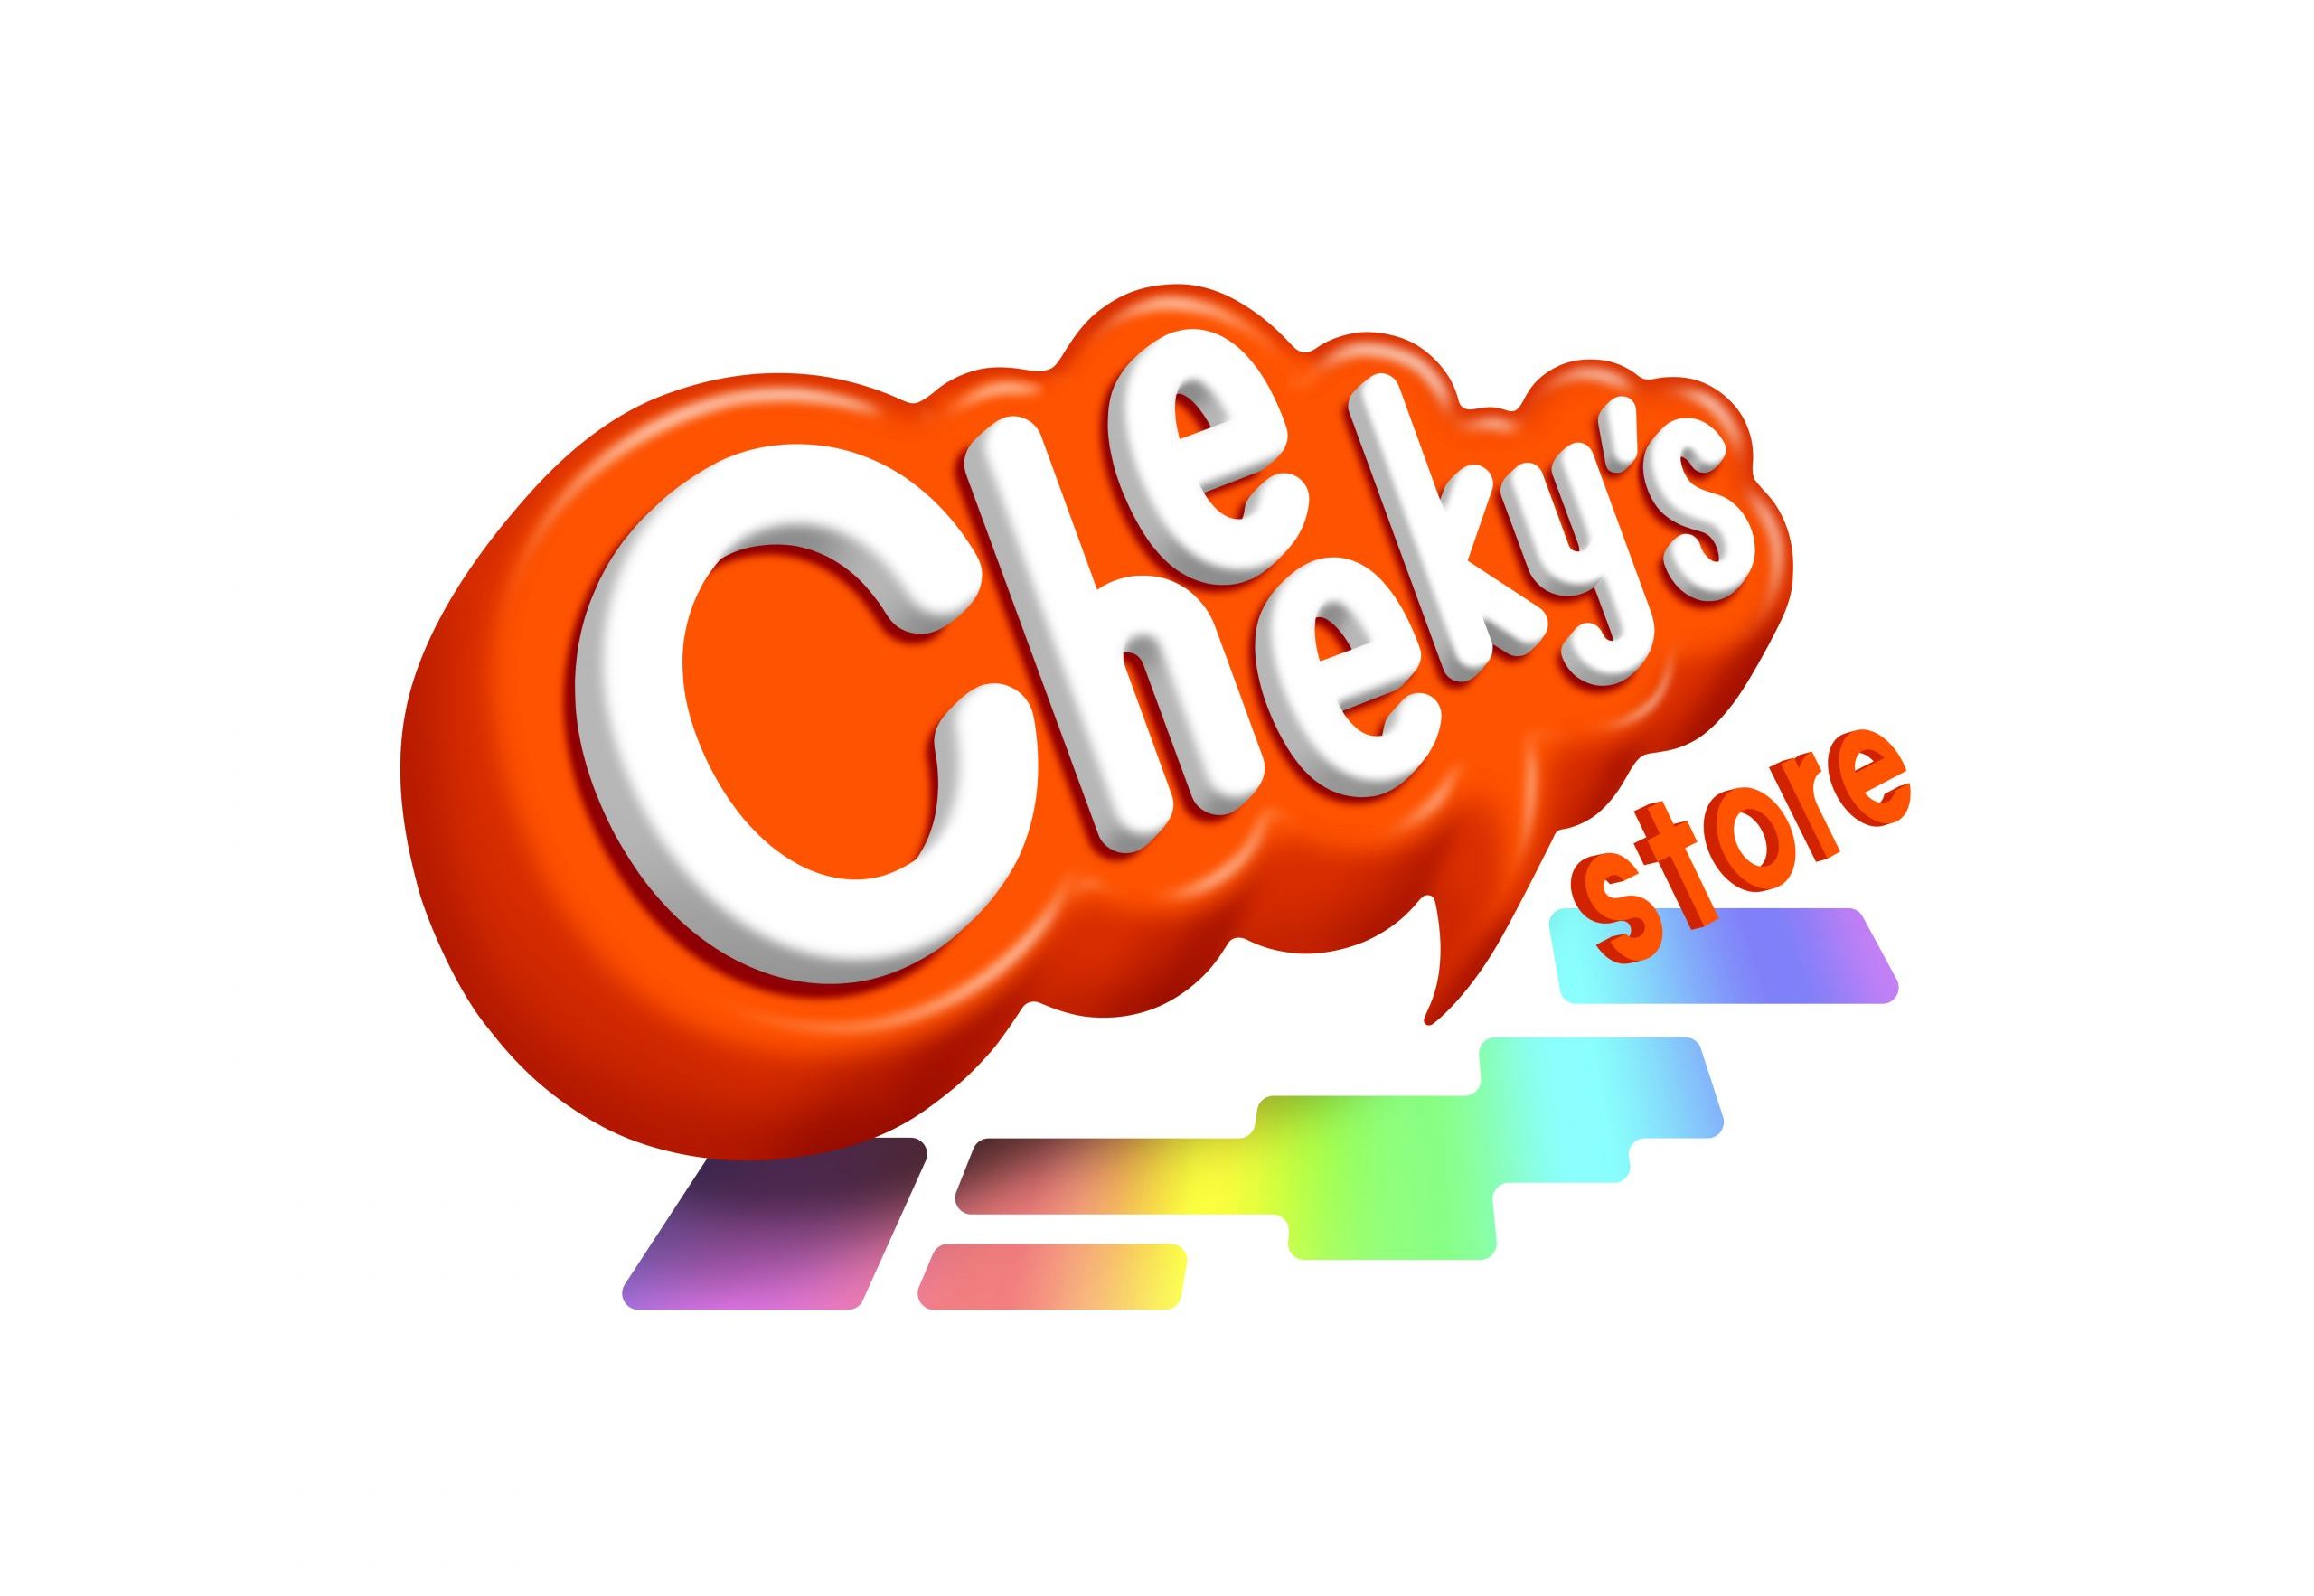 Cheeky’s store-チーキーズストア-